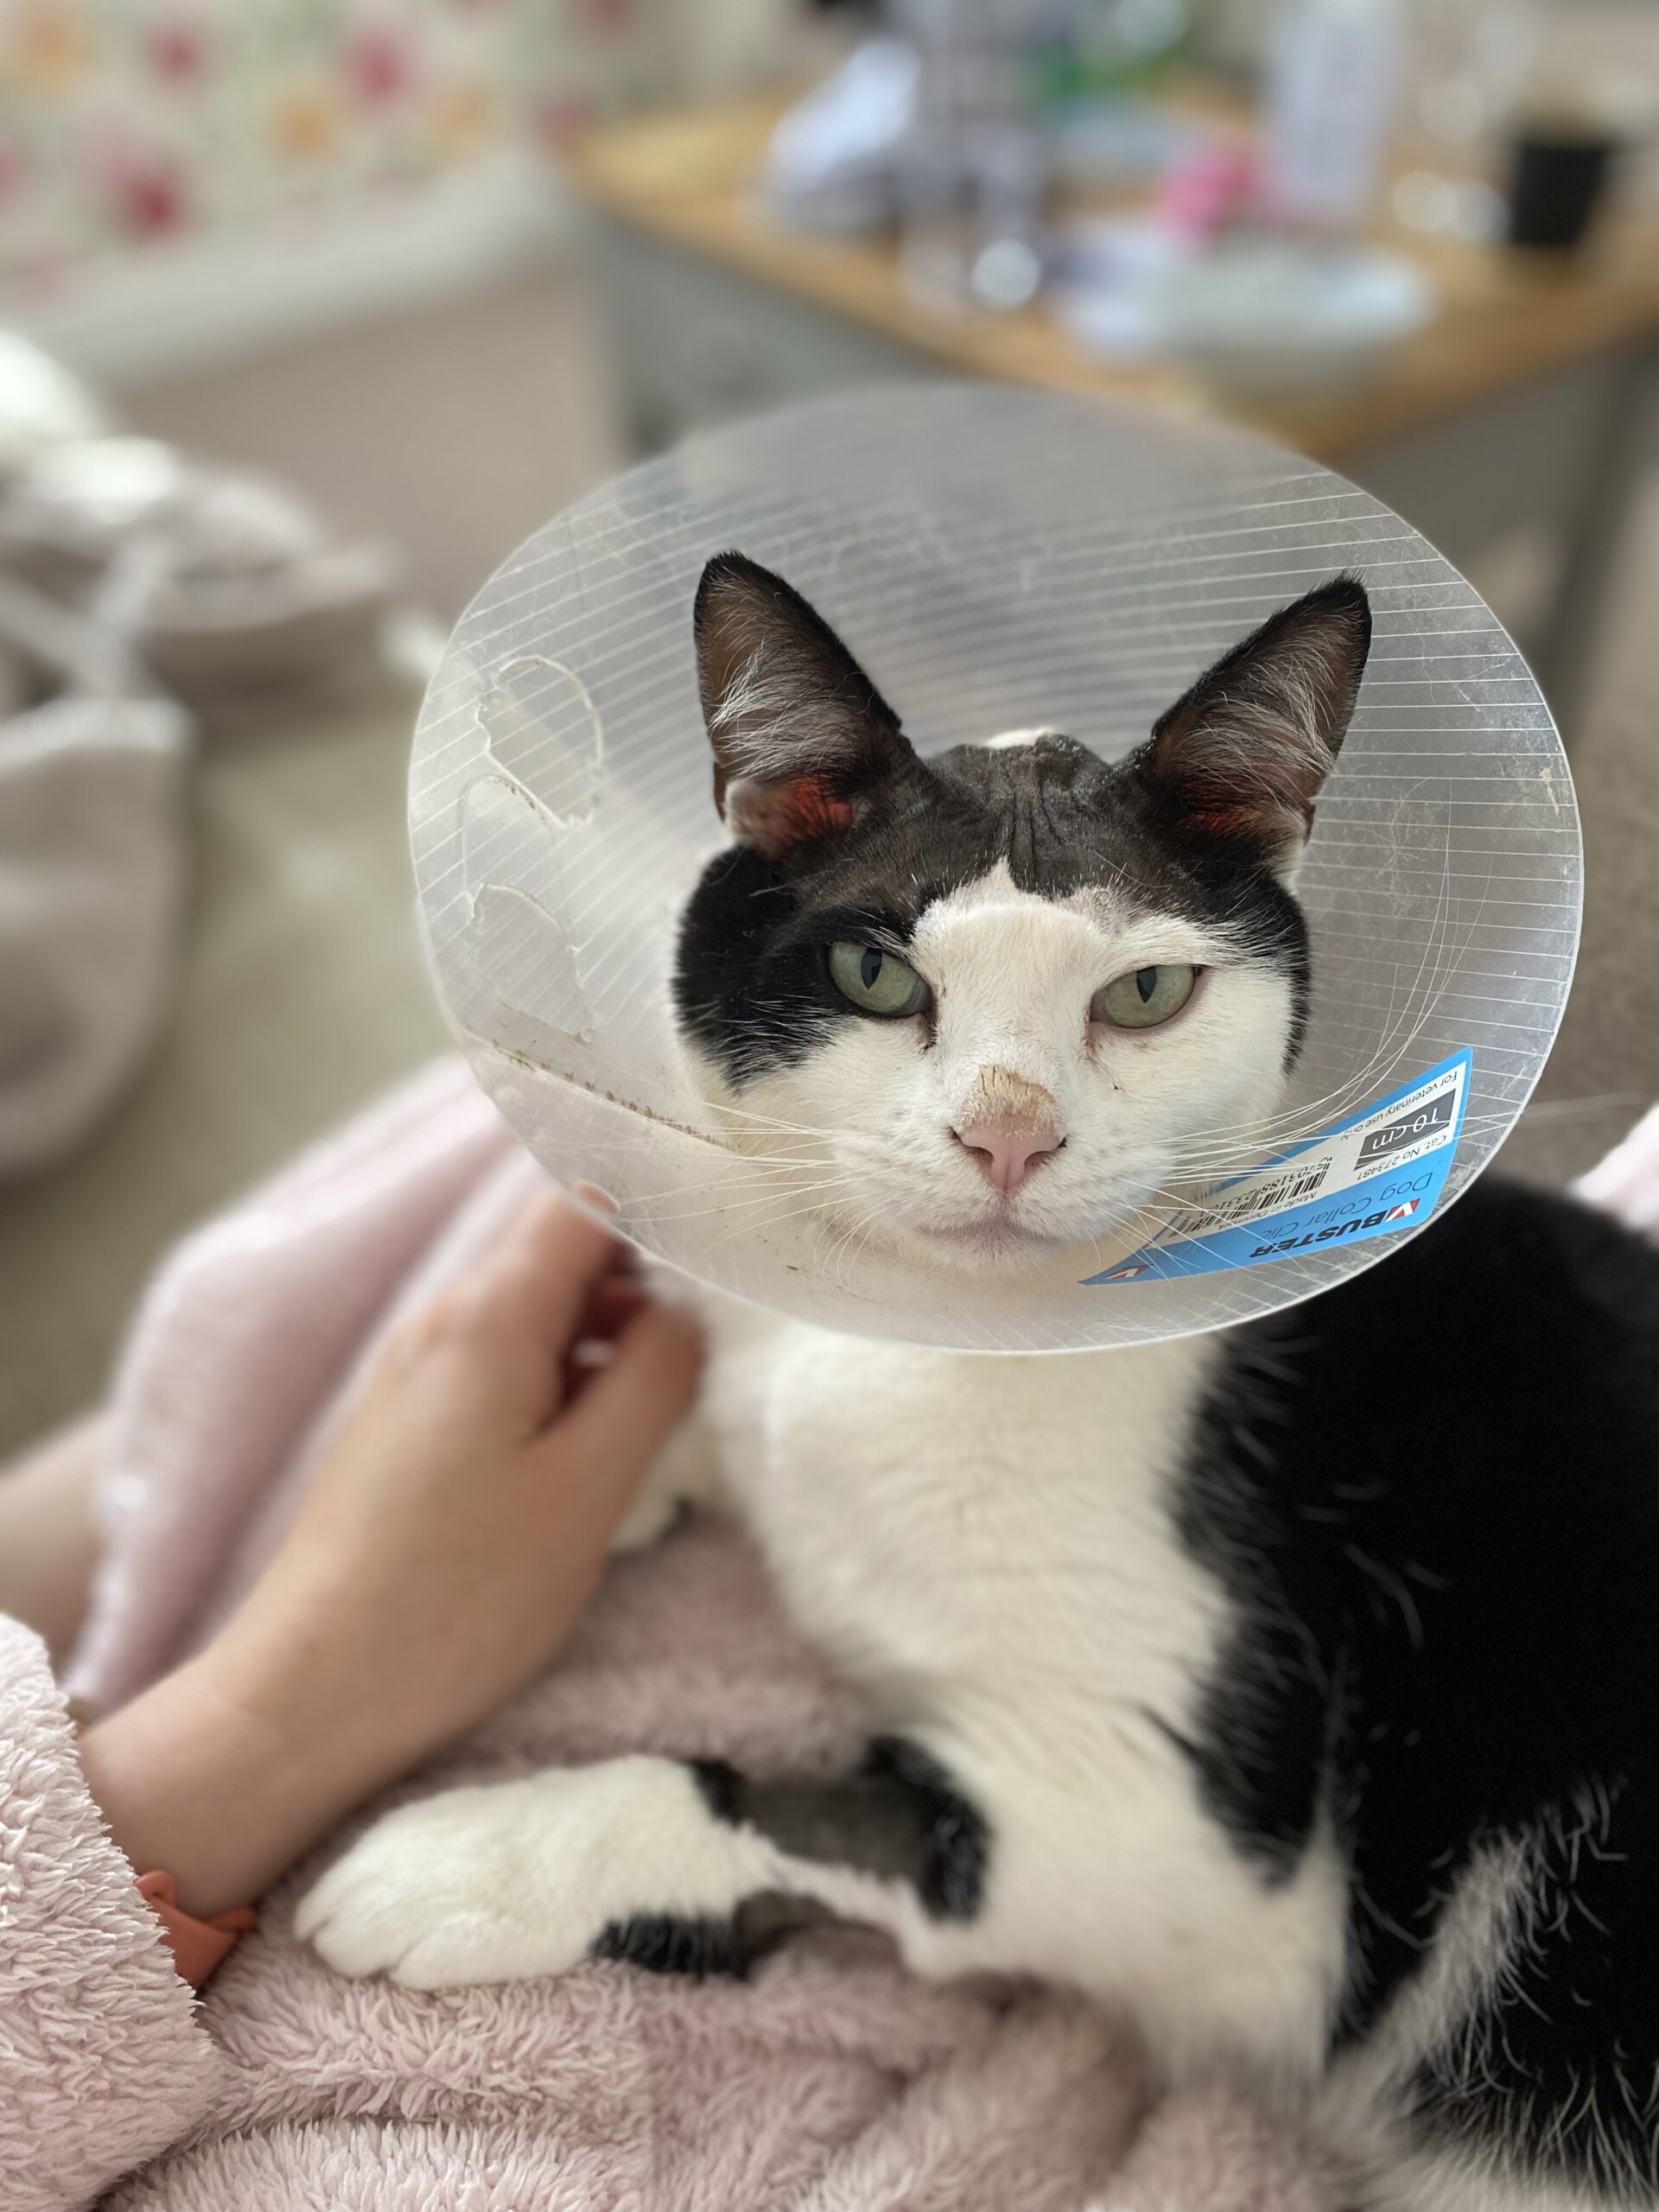 VETS SAVE CAT AFTER FIGHT LEFT PET WITH BRAIN INFECTION